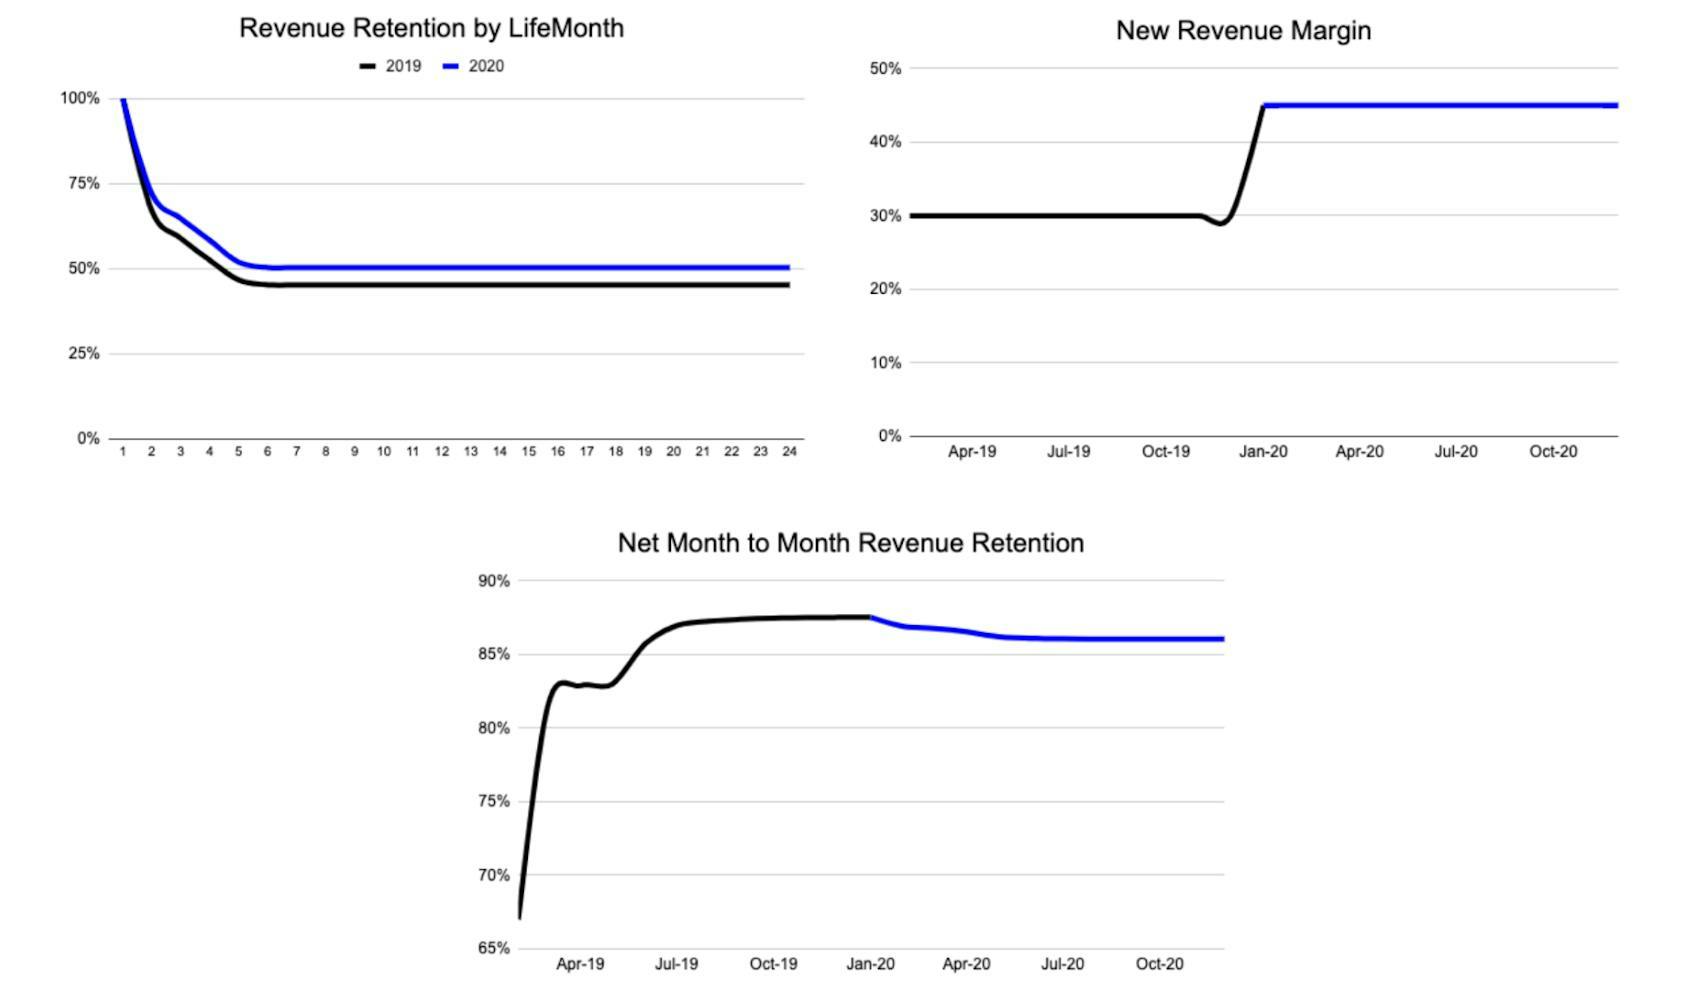 Graph of revenue retention by life month, new revenue margin, and net month to month revenue retention